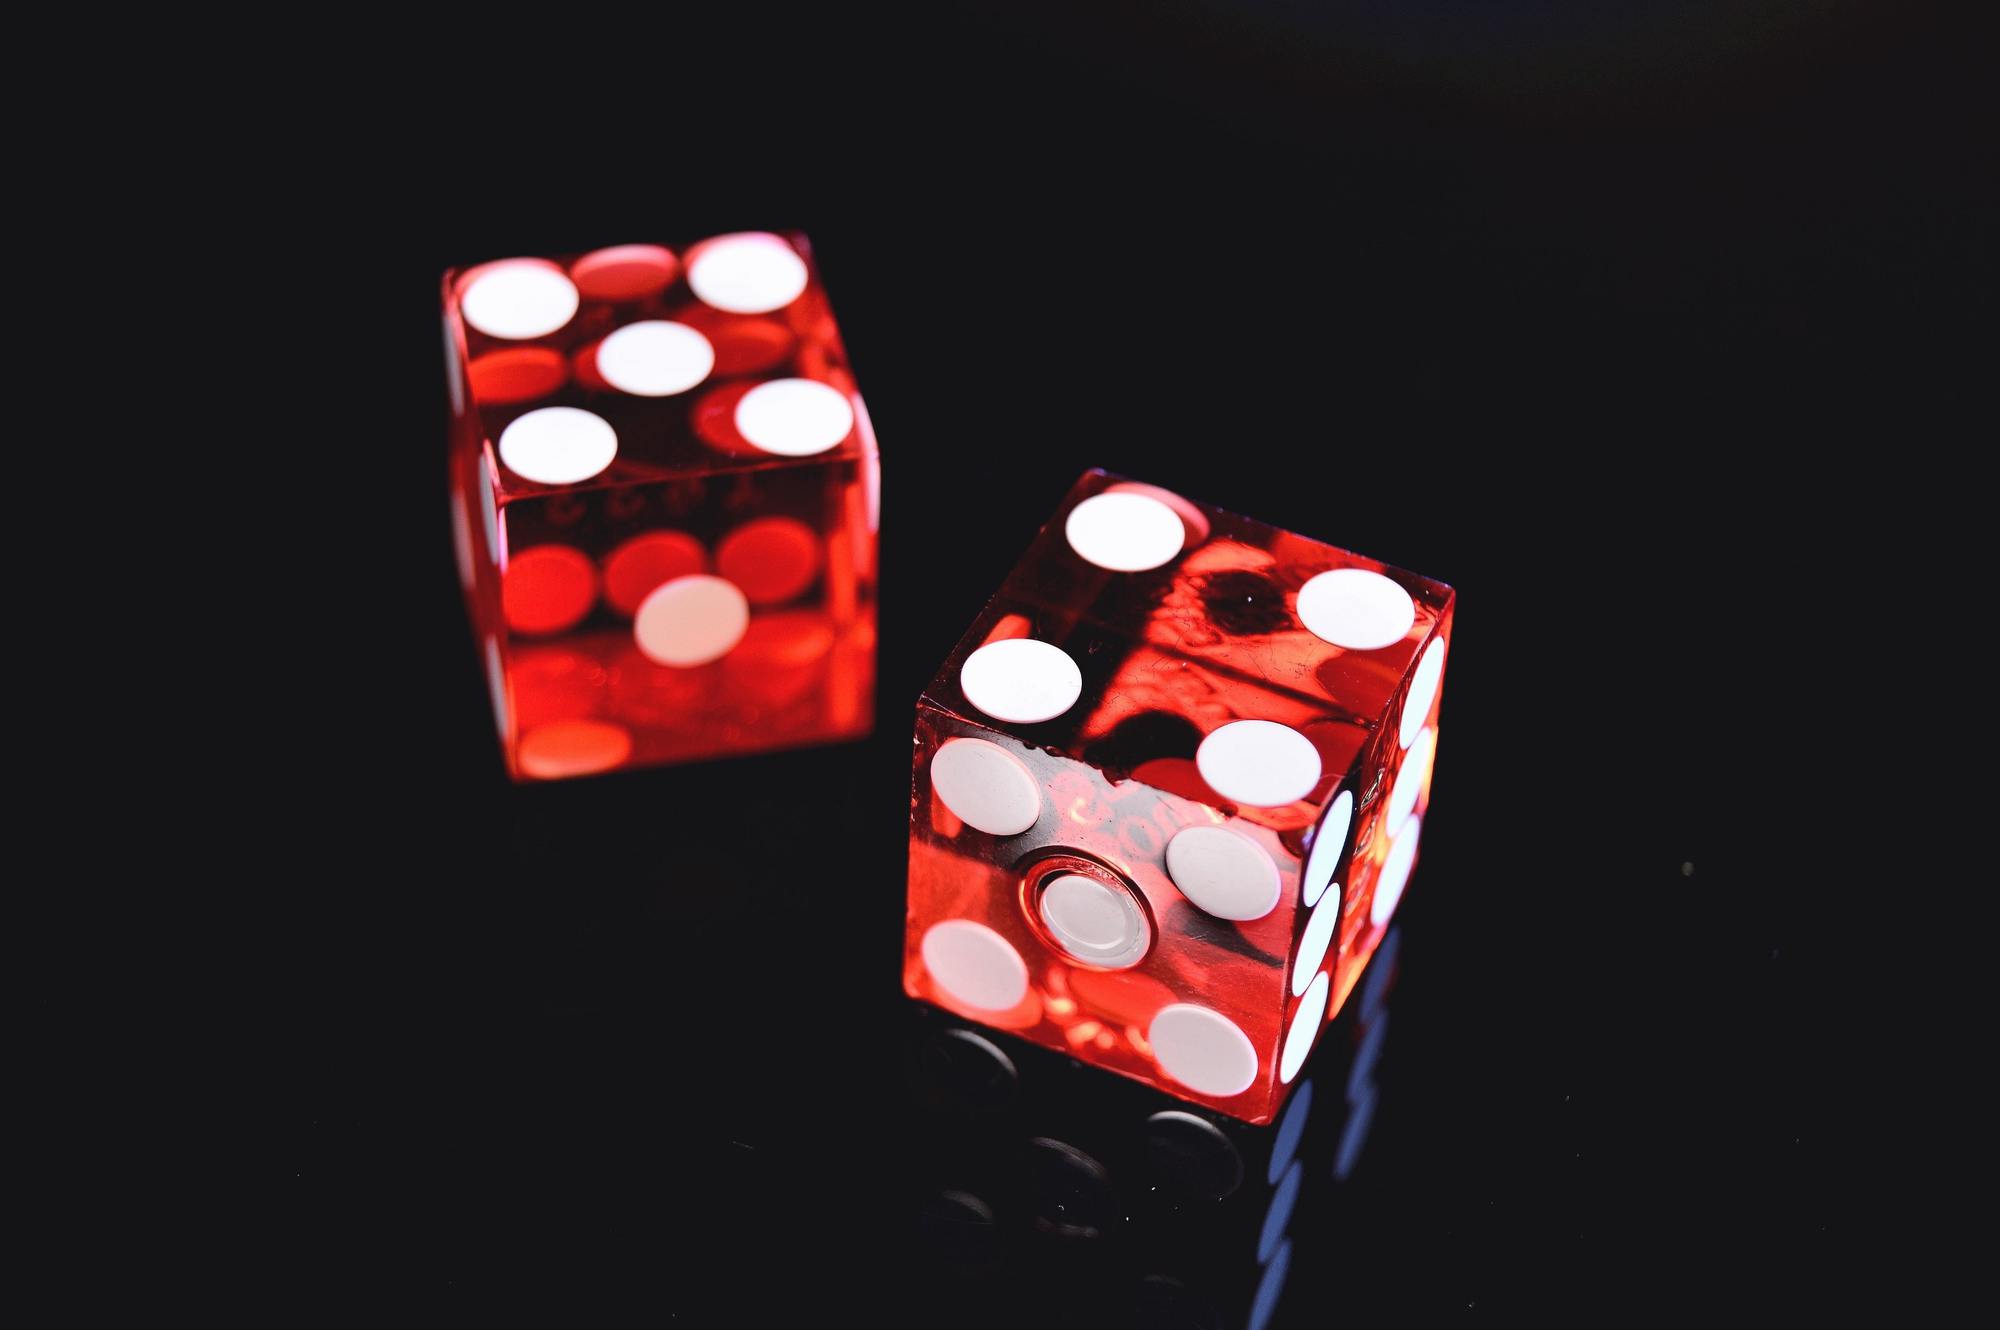 red dice on a black background